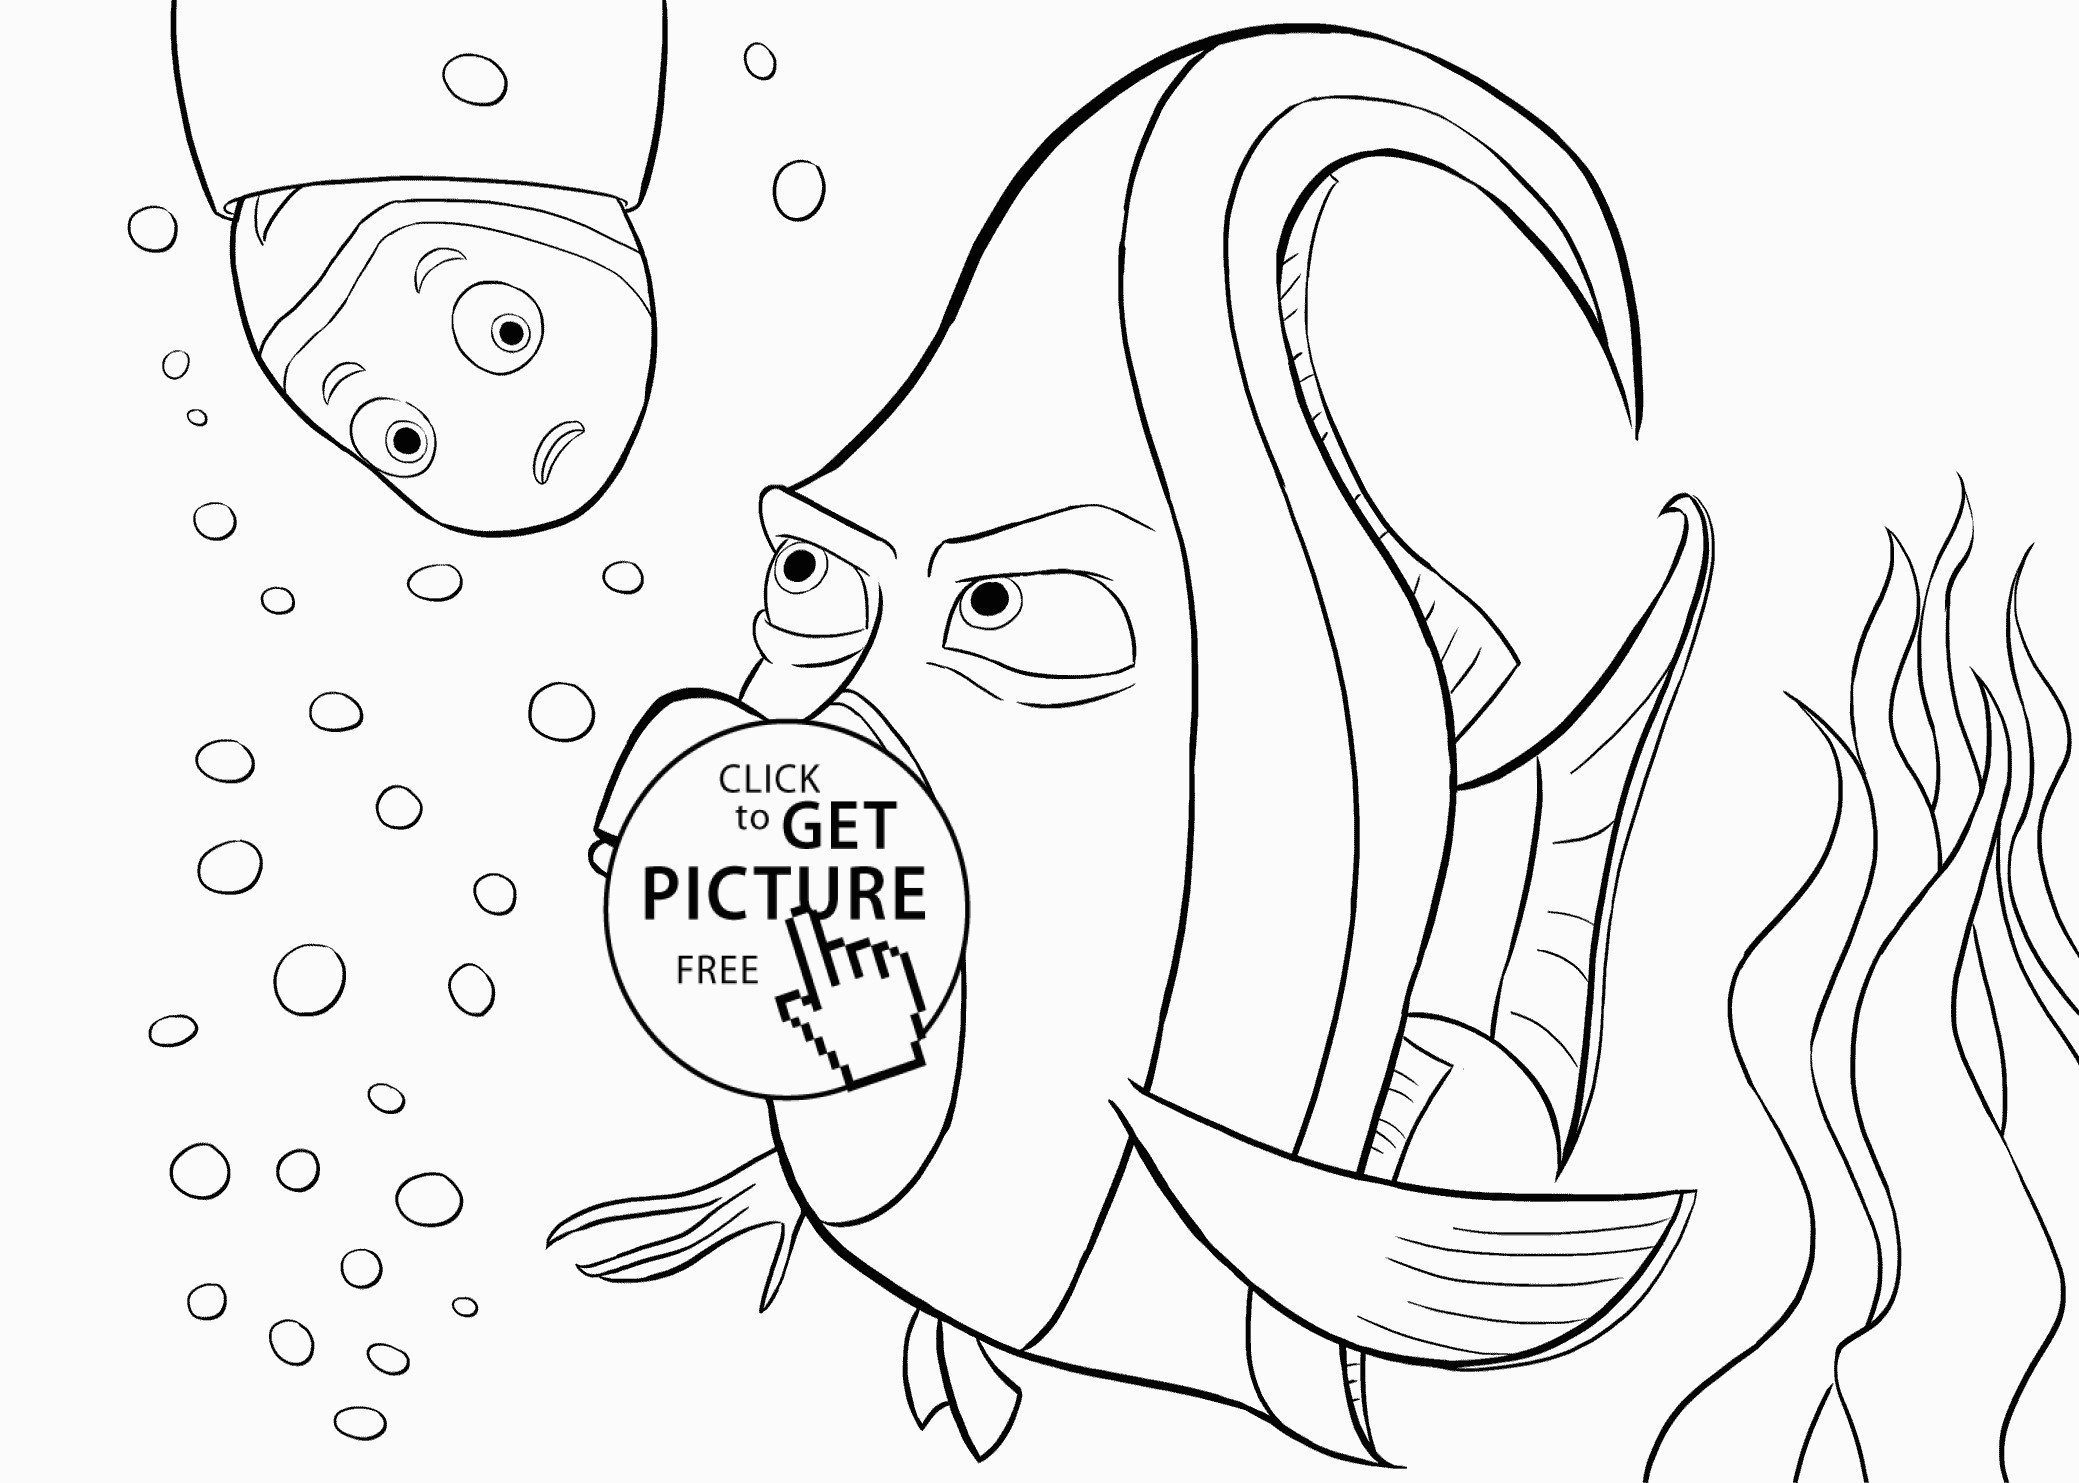 Aquarium Coloring Pages Coloring Ideas Amazing Finding Nemo Printable Coloring Pages Ideas